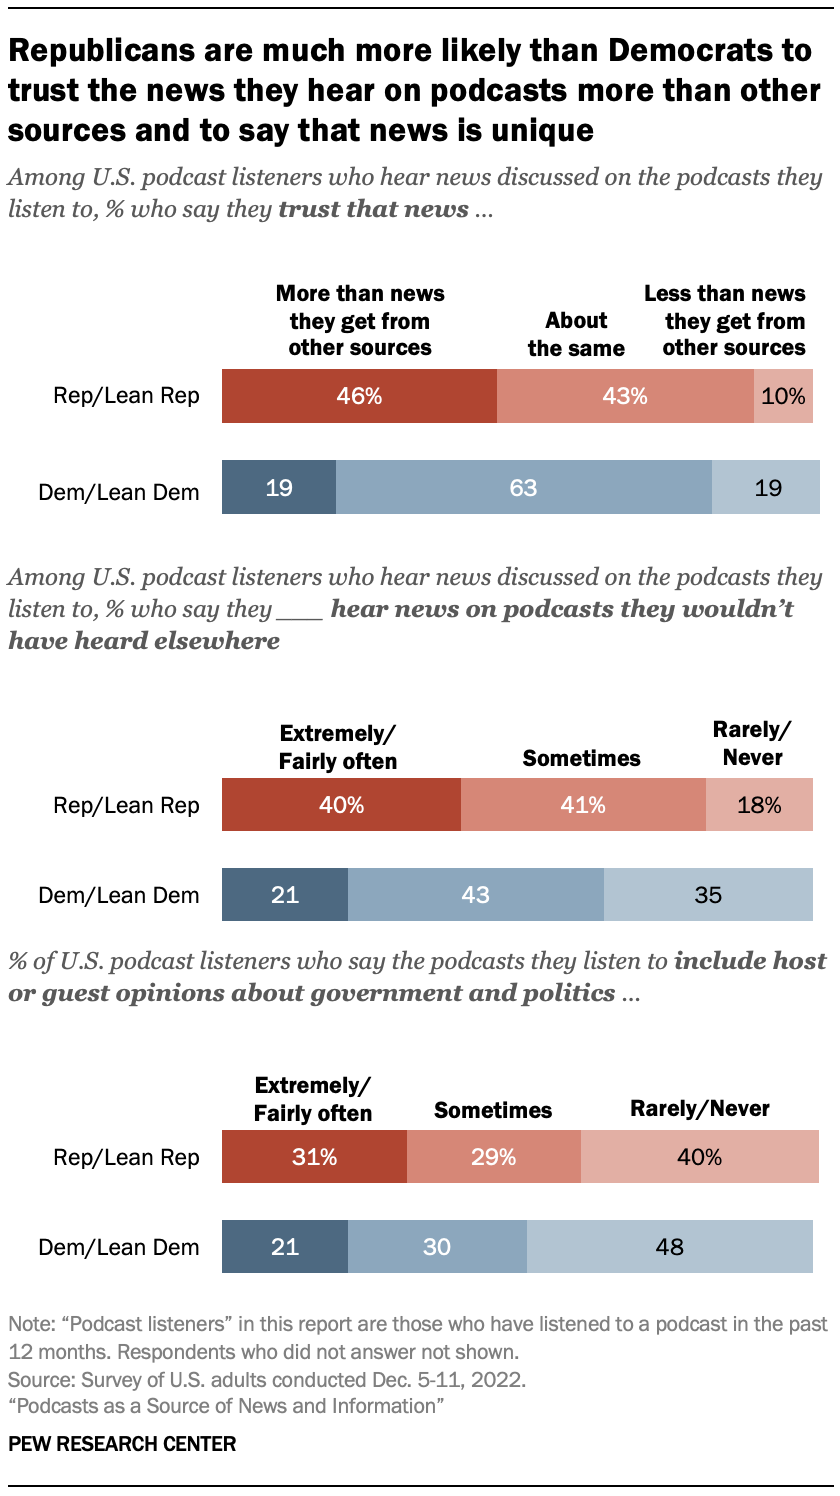 Republicans are much more likely than Democrats to trust the news they hear on podcasts more than other sources and to say that news is unique